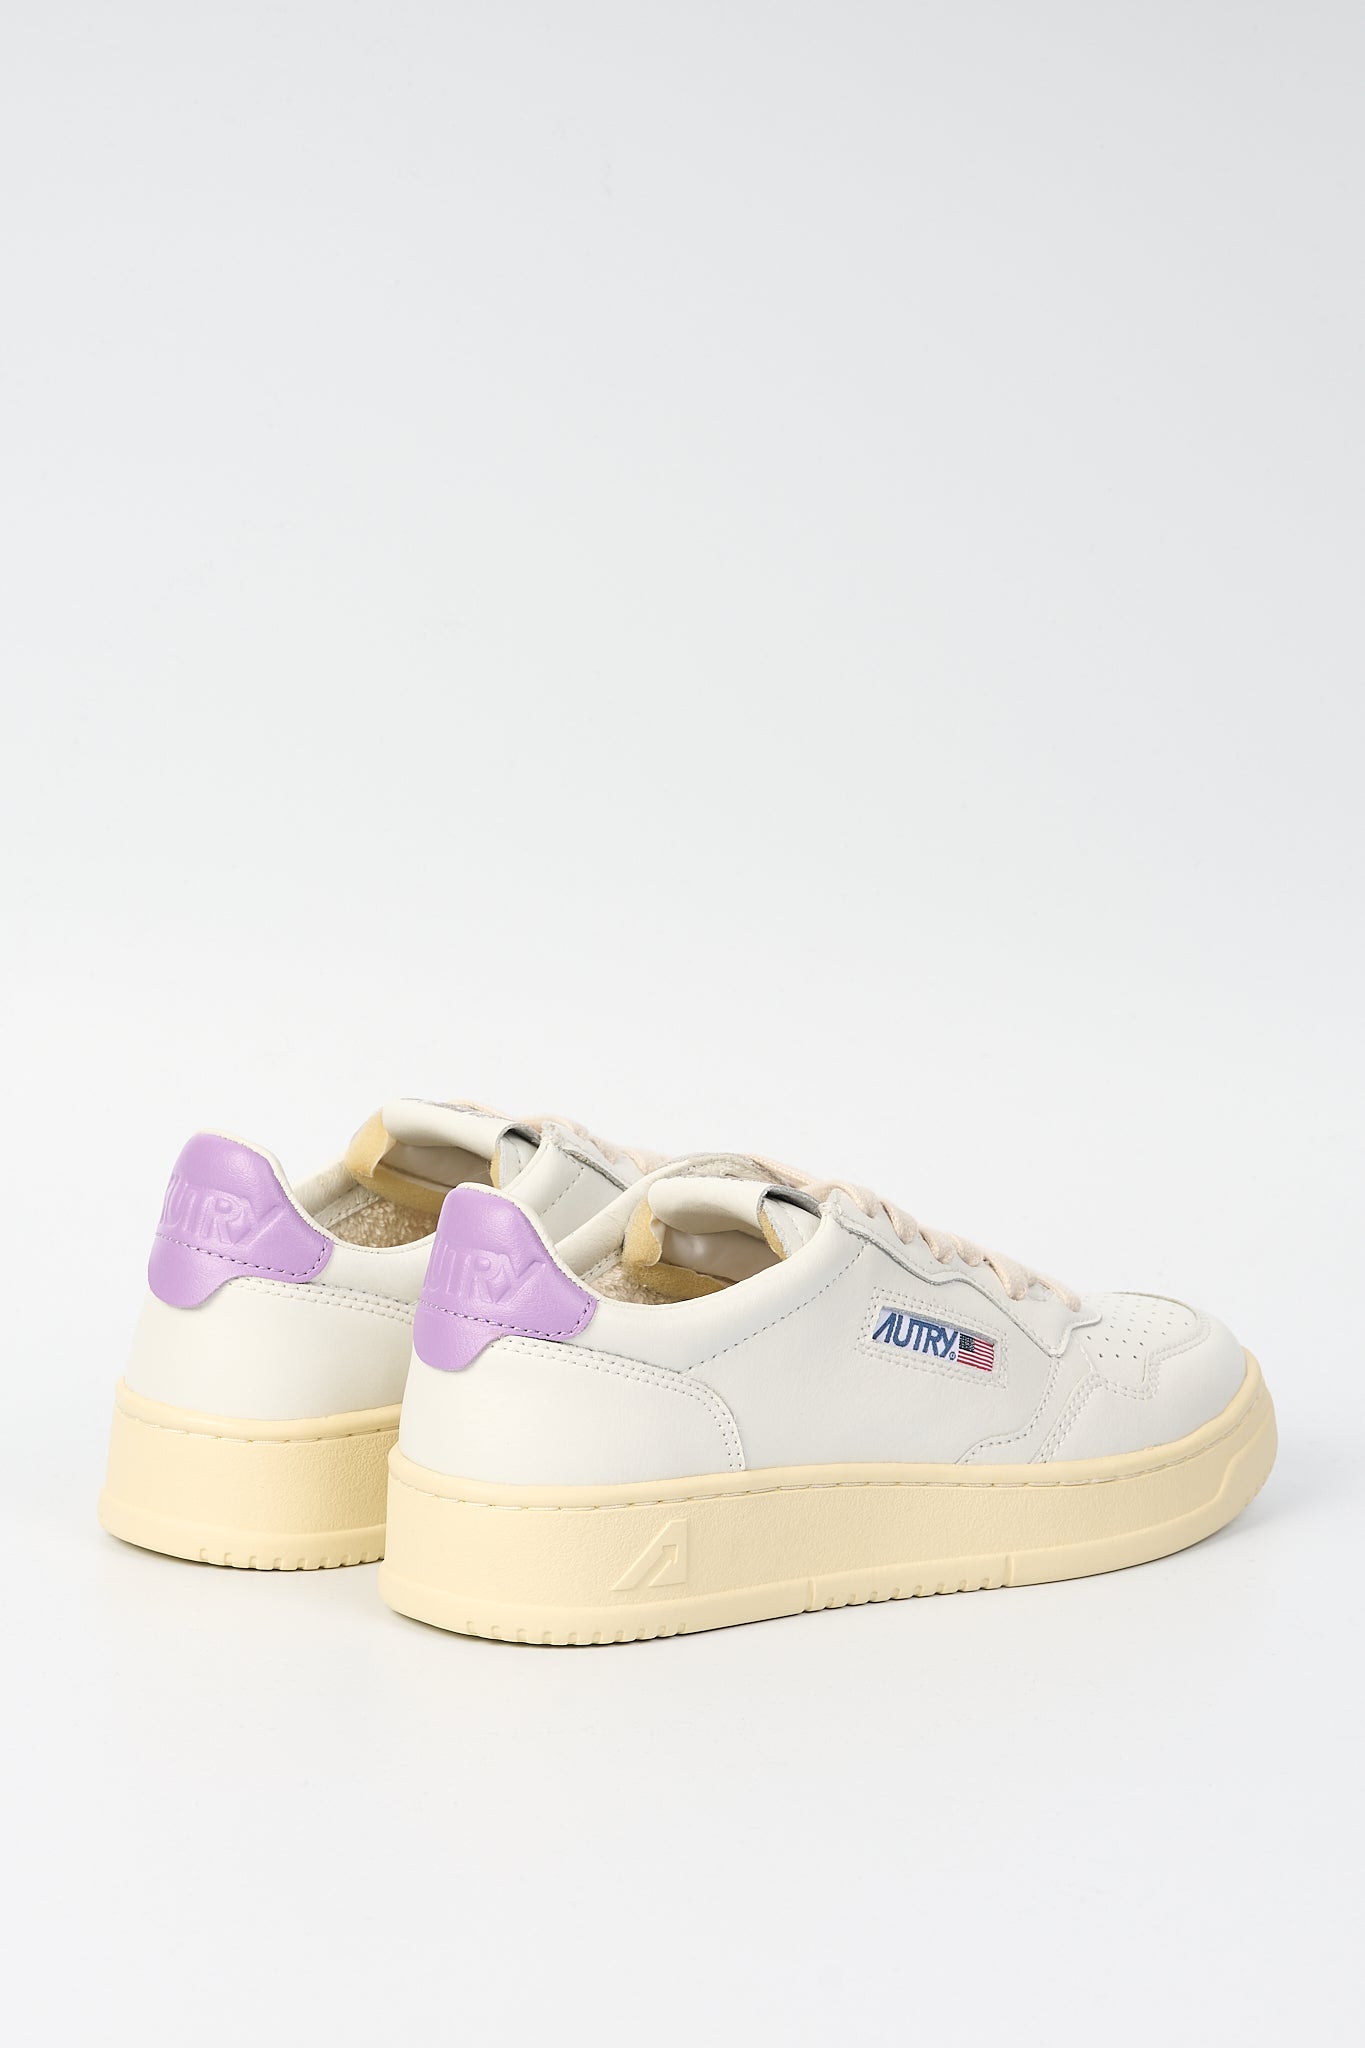 Autry Sneaker Medalist AULW-LL59 Bianco/lilla Donna-5